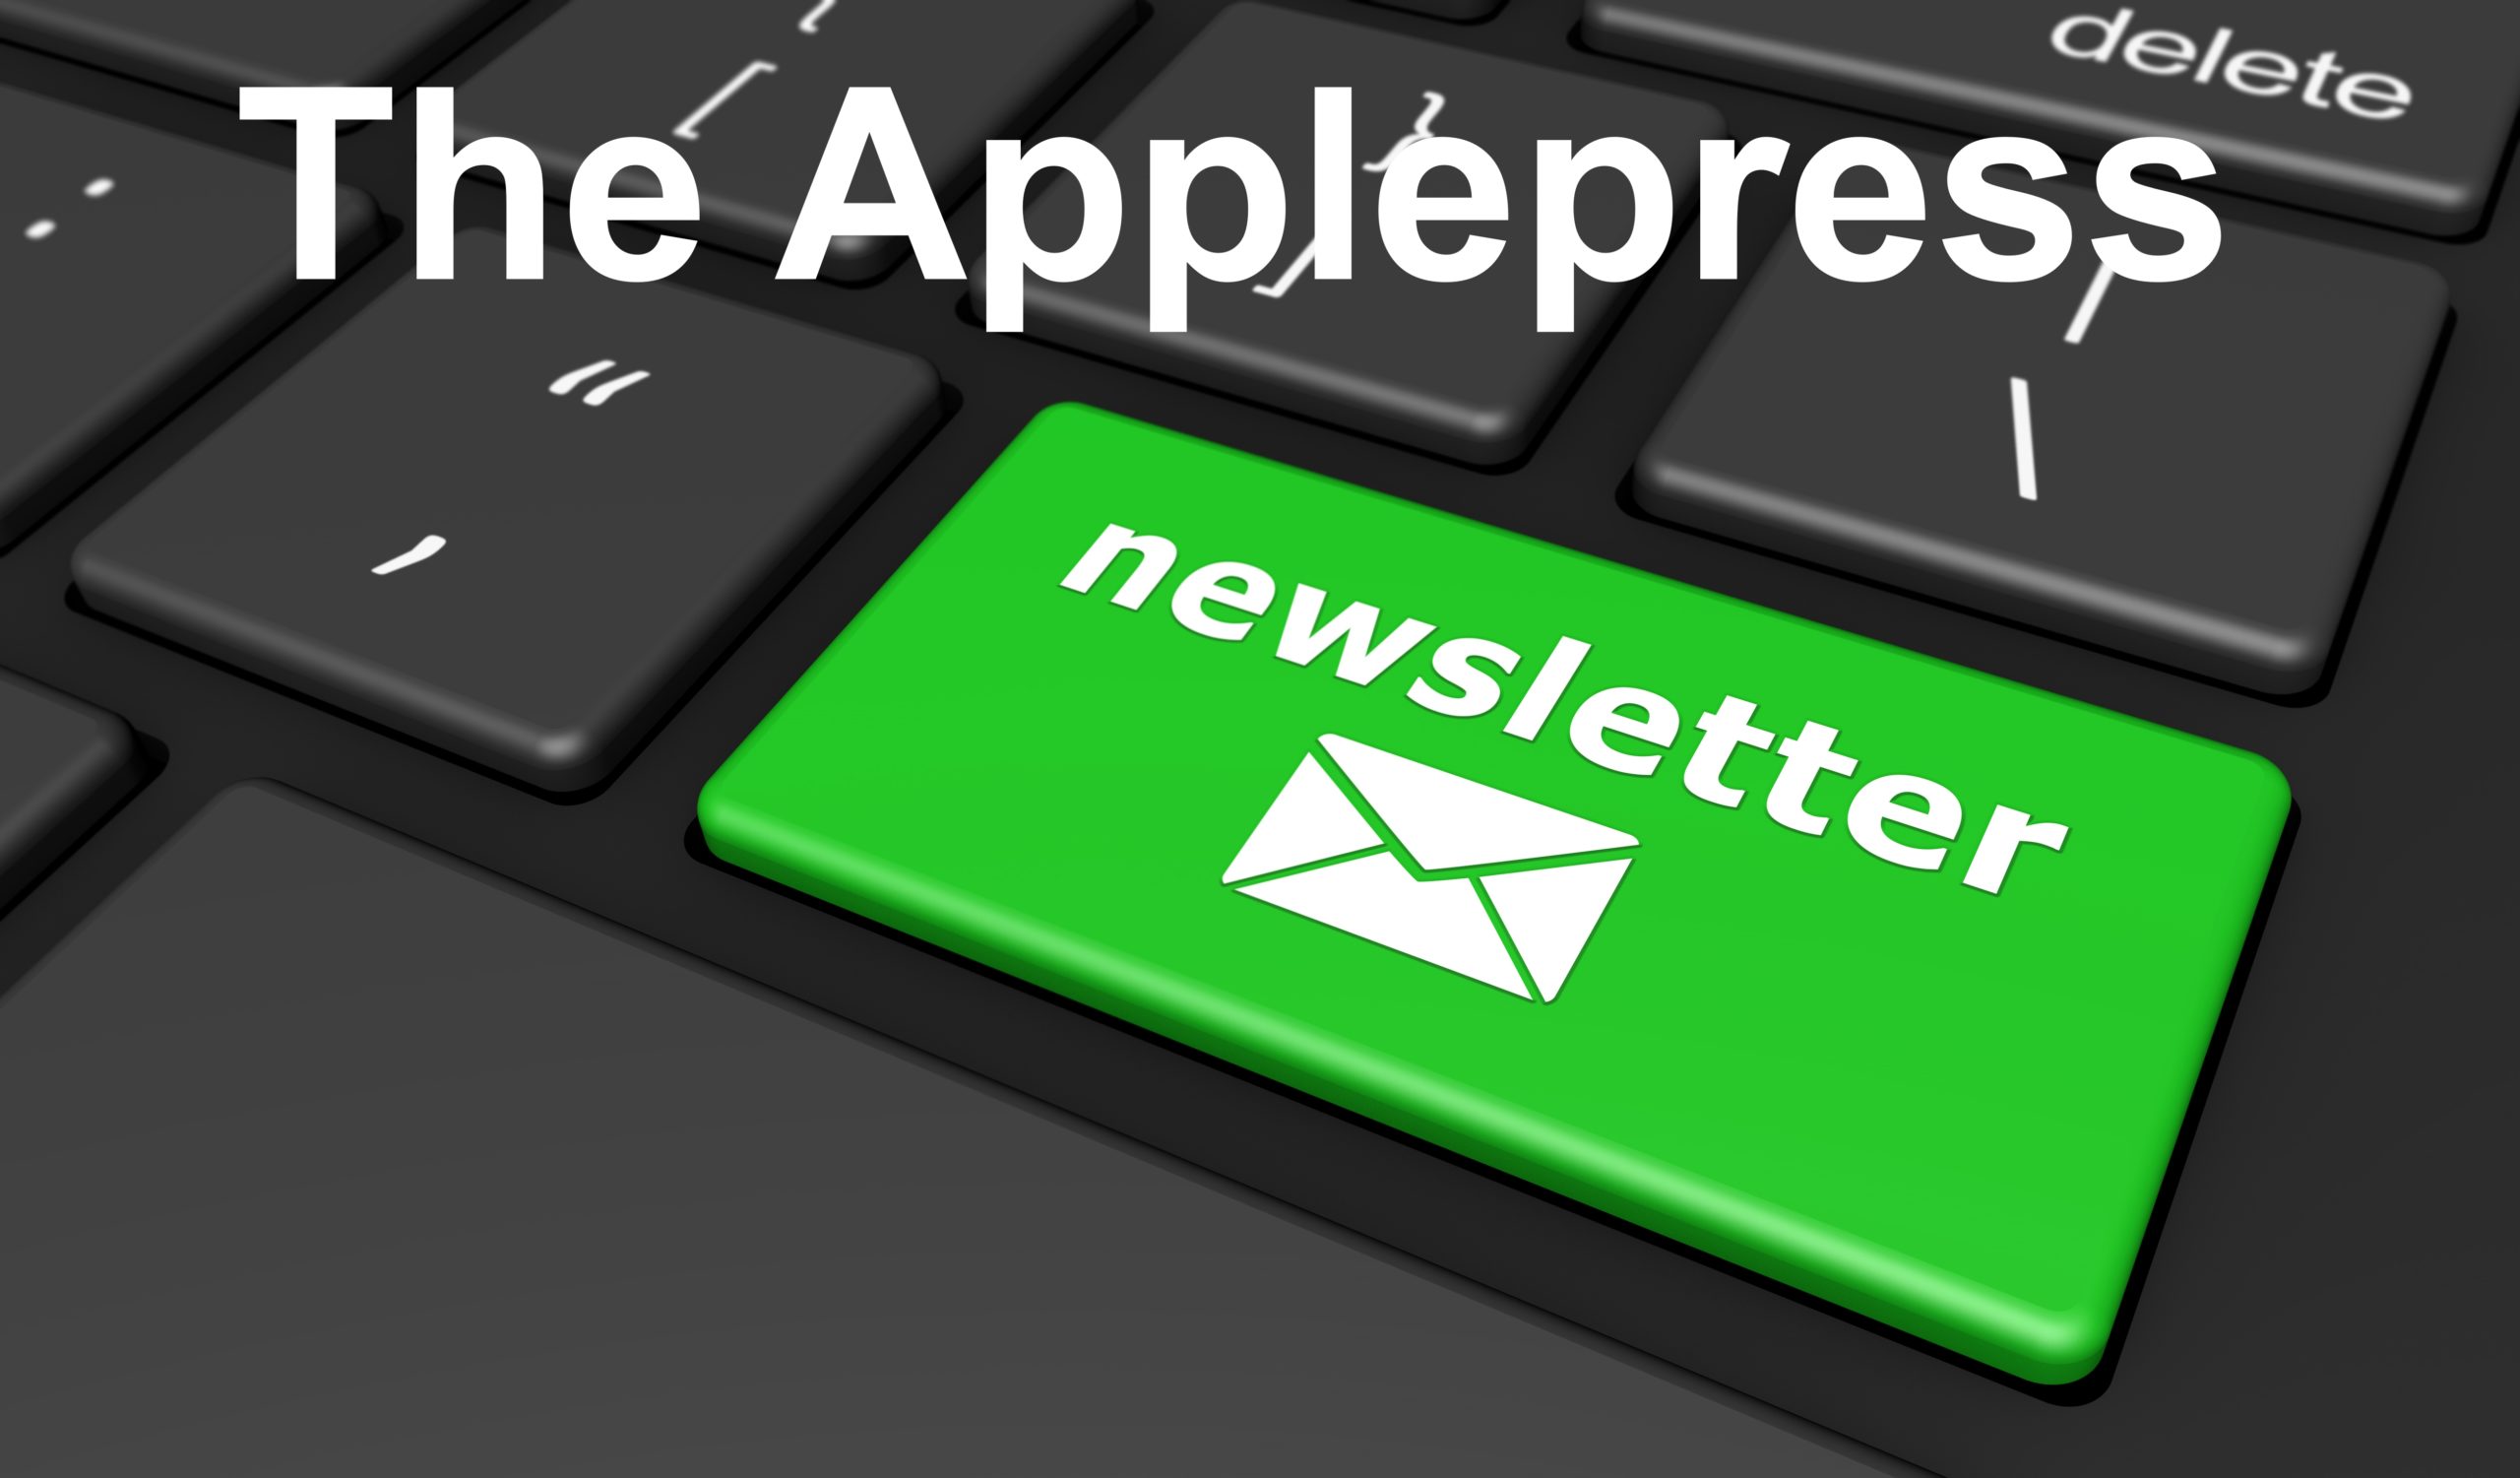 Newsletter concept with sign, letters and an email icon on a green computer keyboard button 3D illustration.